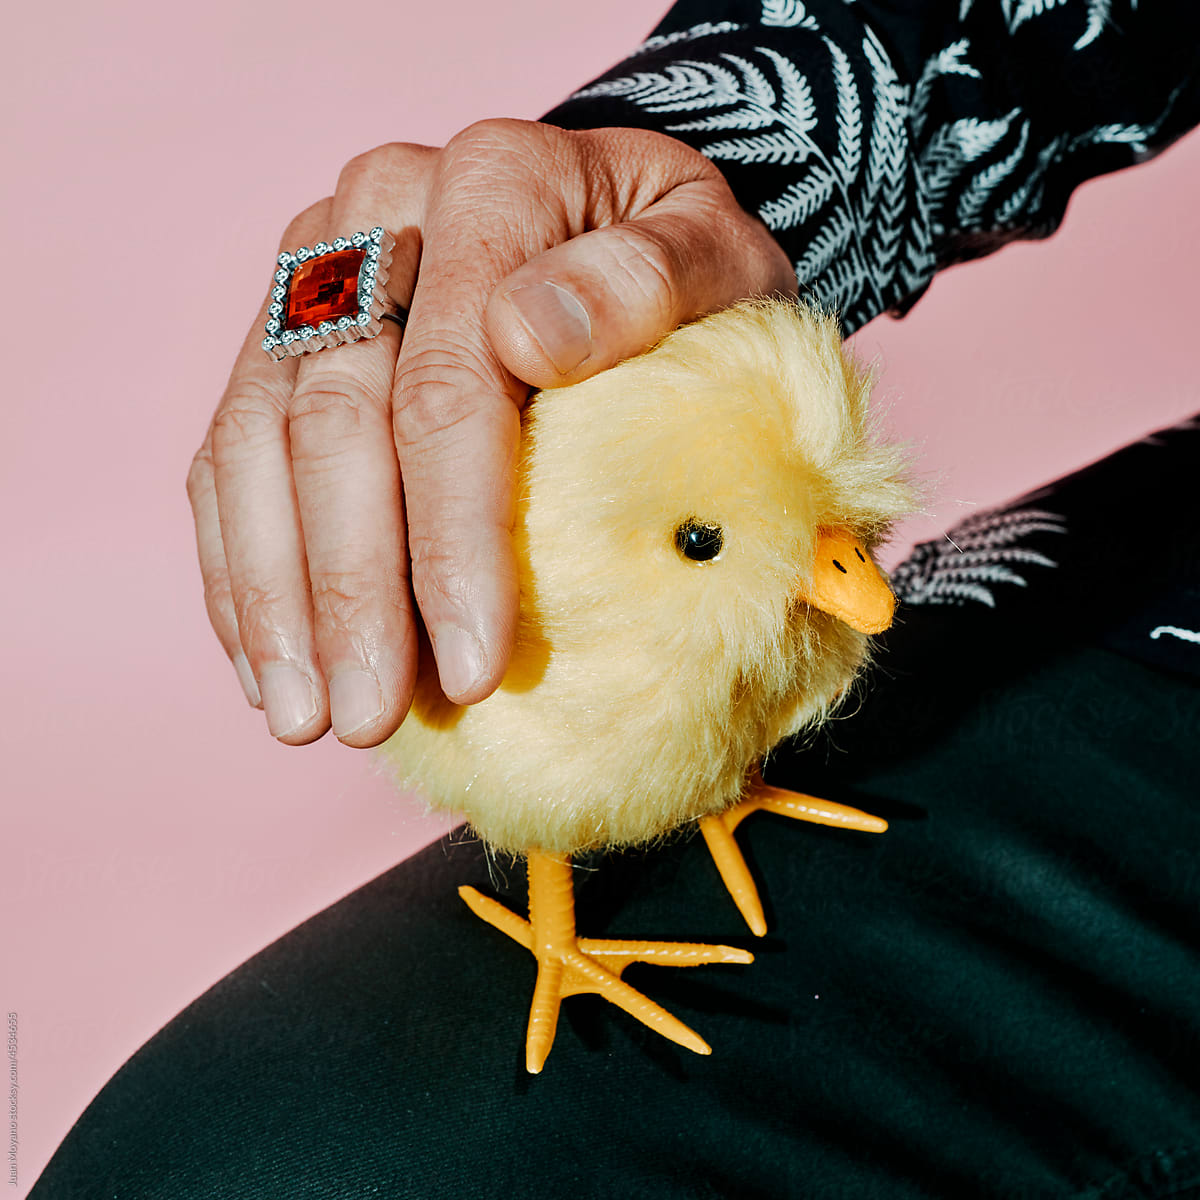 man pets a yellow toy chick